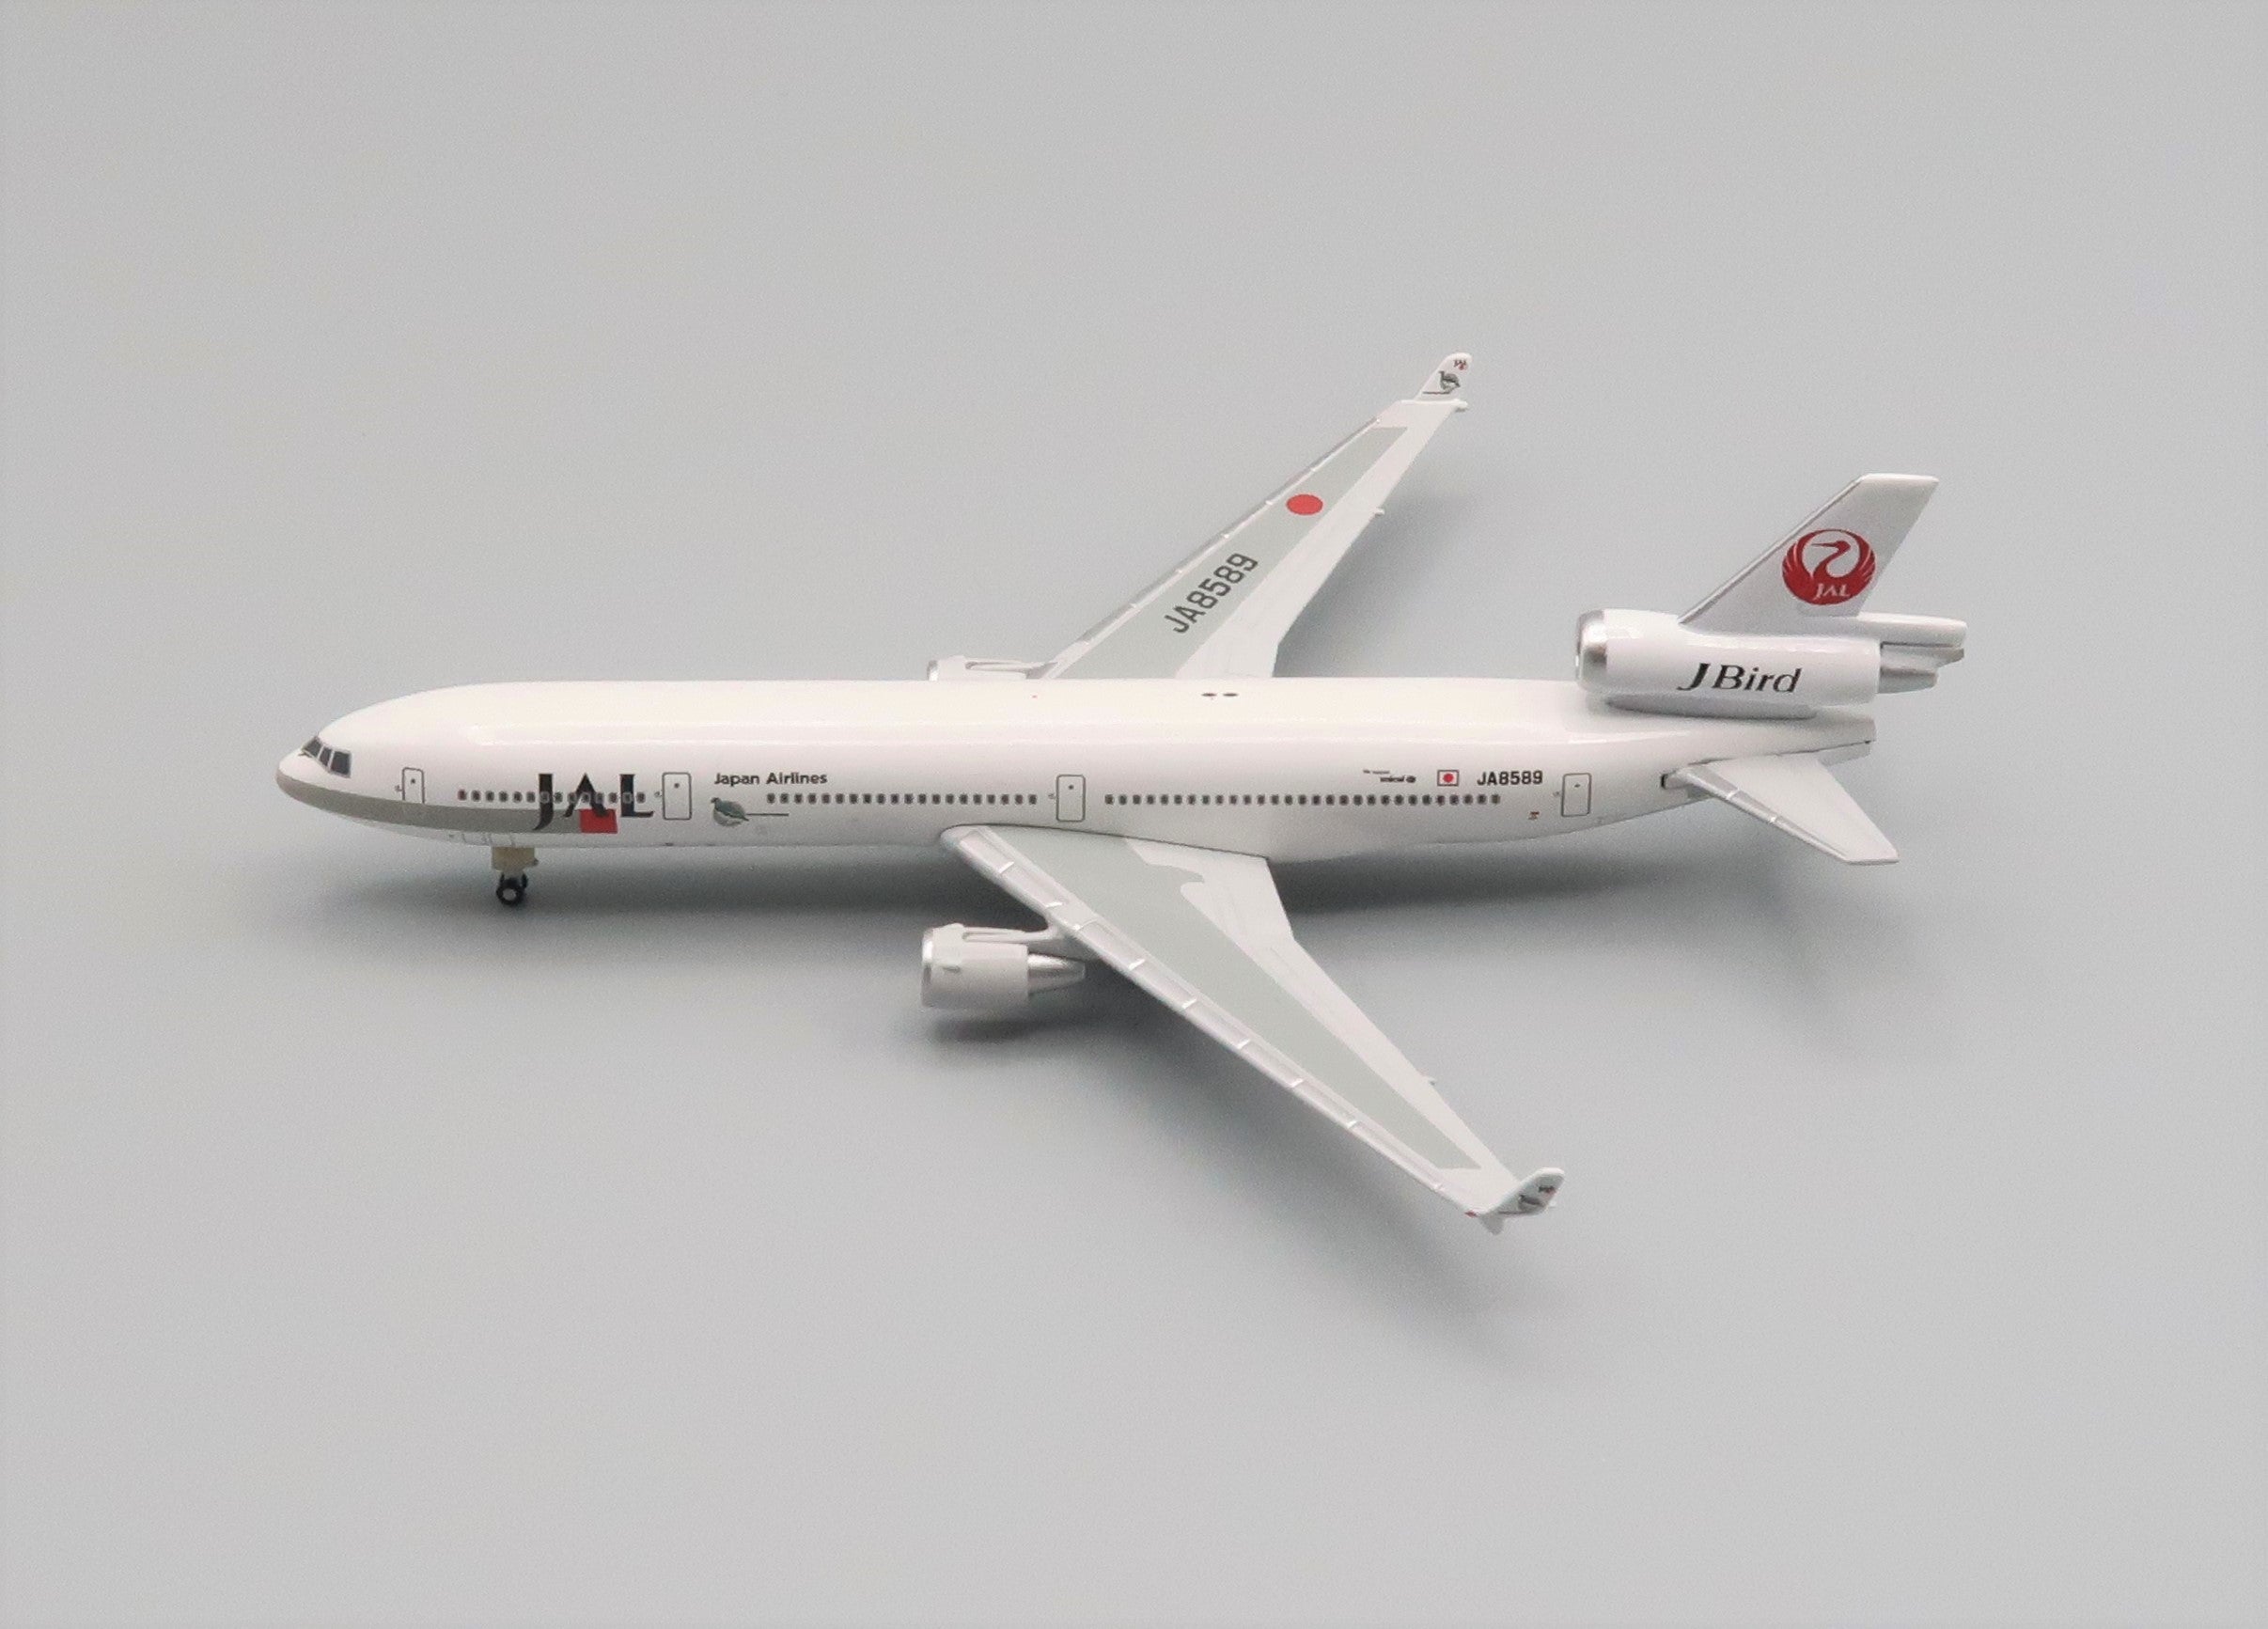 StarJets】1/500 日本航空 MD11 | 【超合金⁉︎】旅客機ダイキャスト